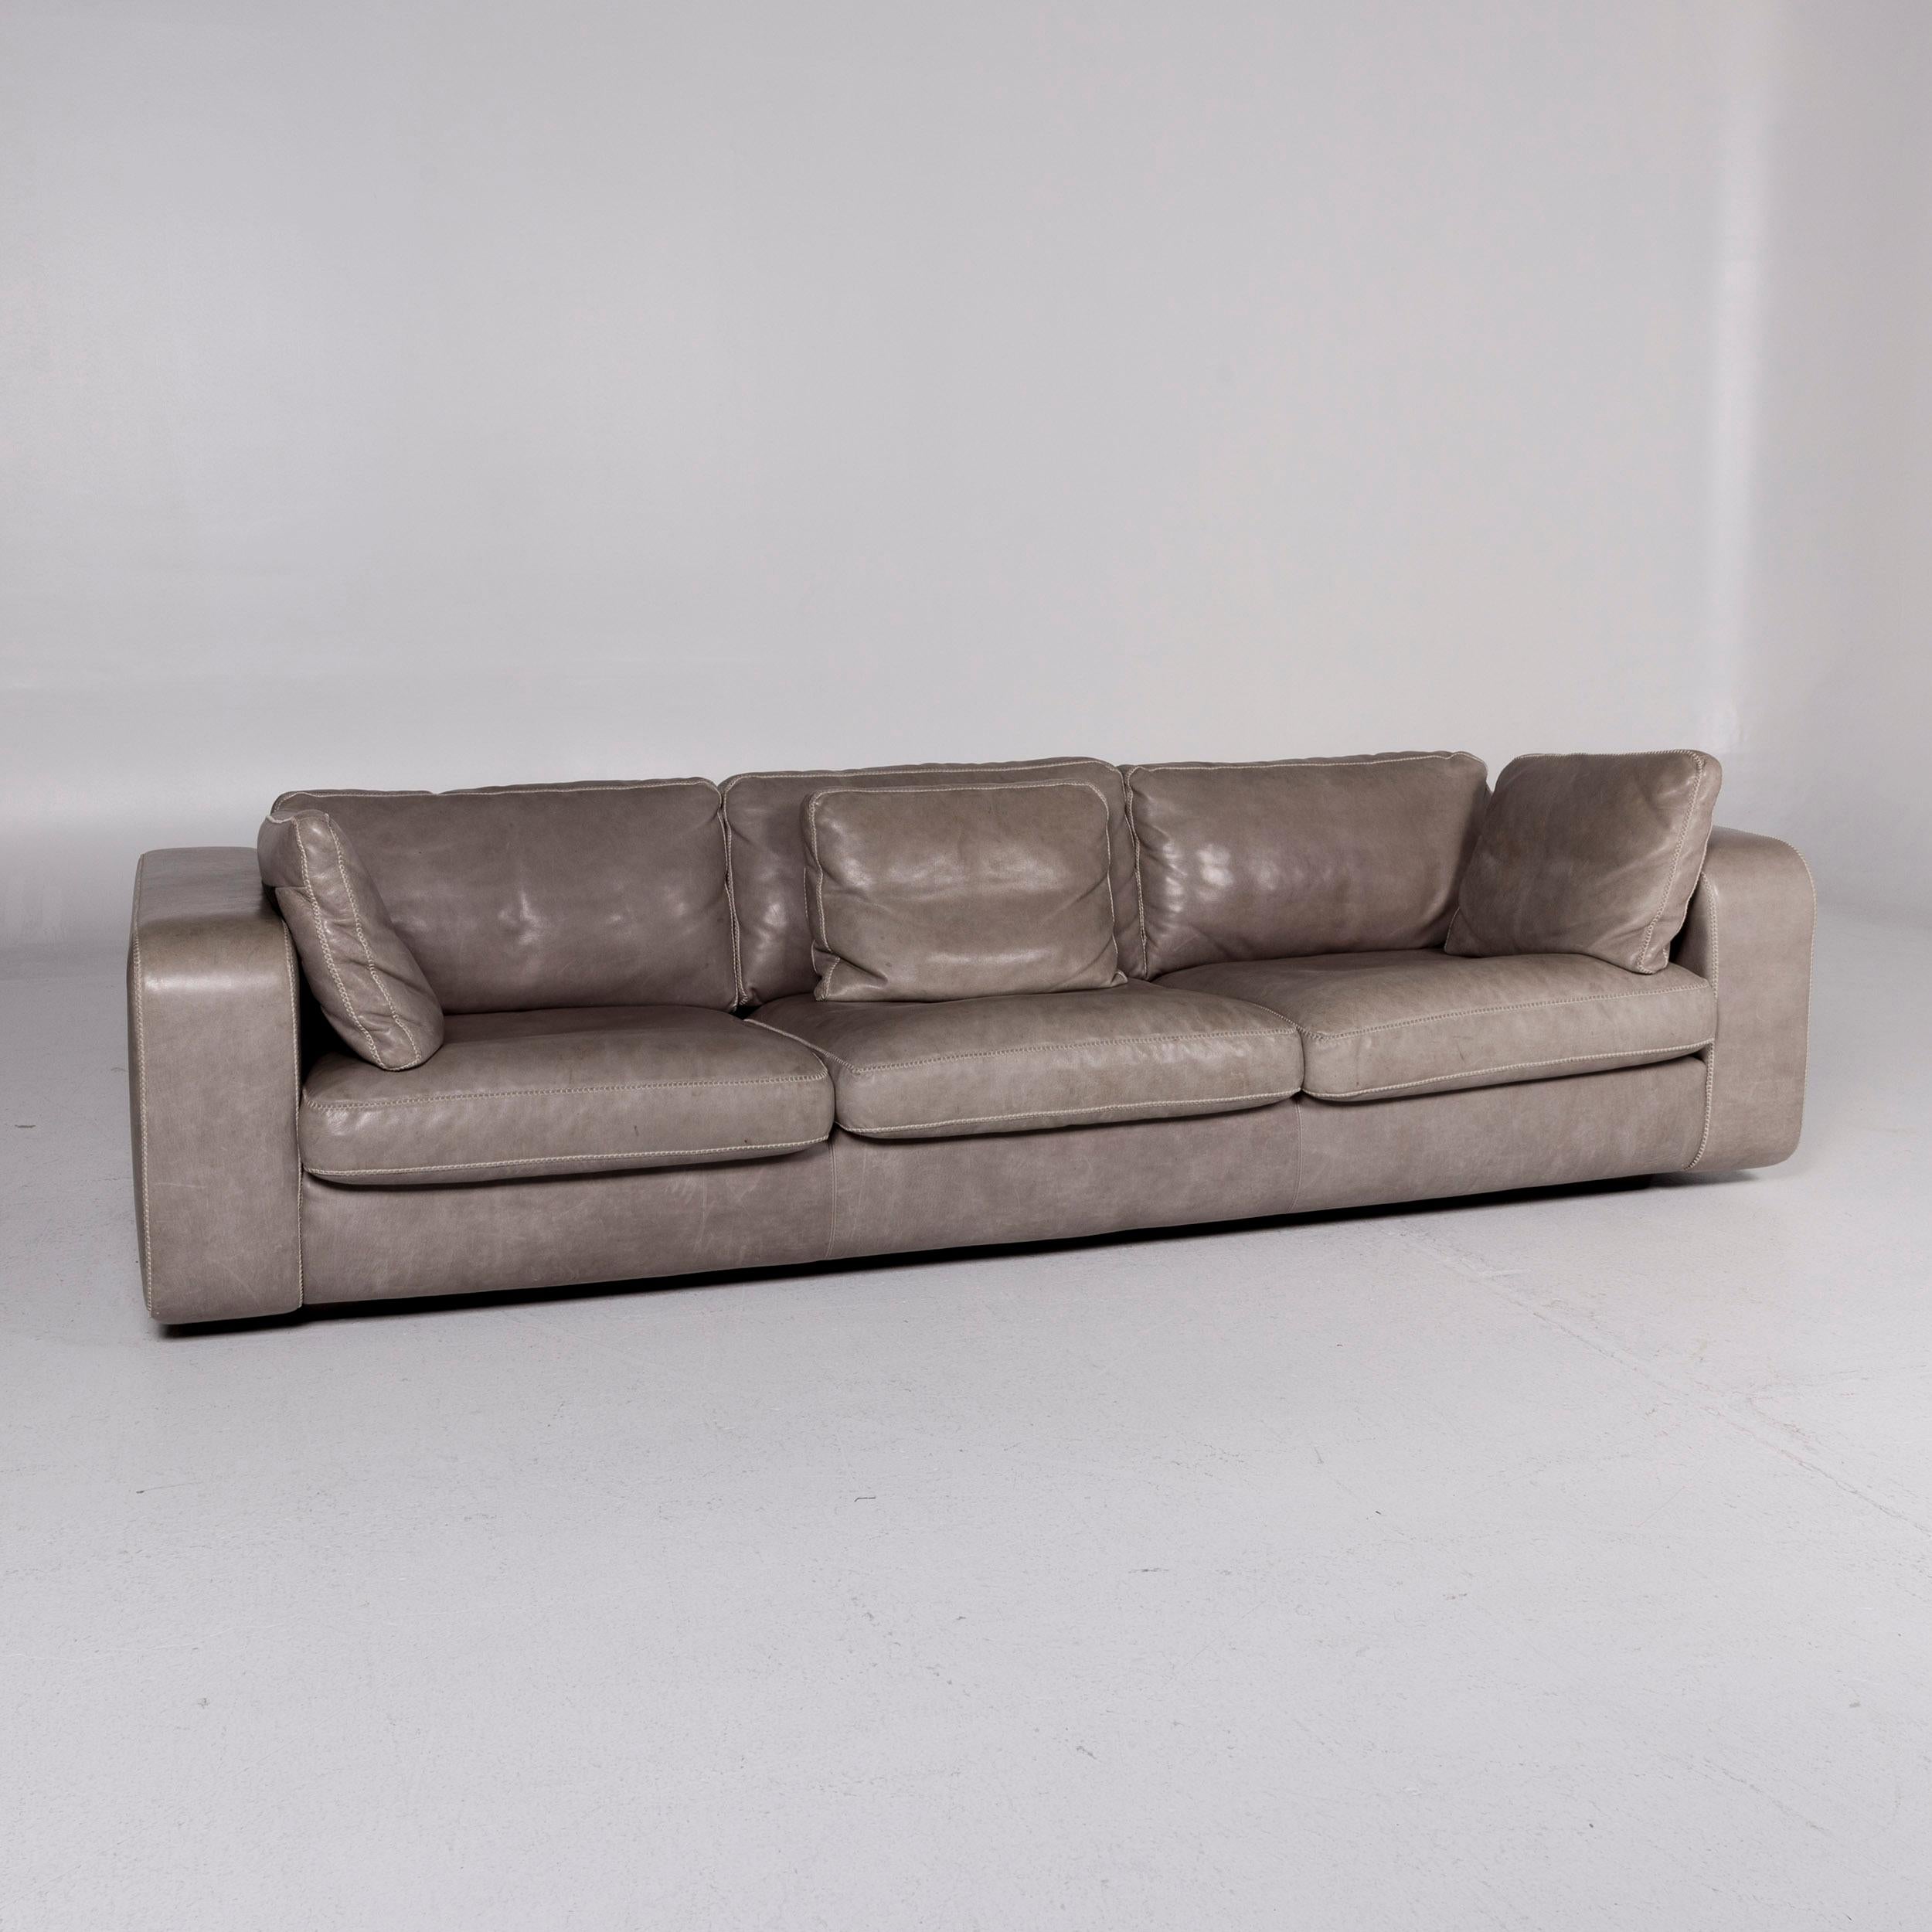 We bring to you a Machalke Valentino leather sofa gray three-seat couch.

 Product measurements in centimeters:
 
Depth 101
Width 267
Height 66
Seat-height 37
Rest-height 55
Seat-depth 56
Seat-width 223
Back-height 38.
 